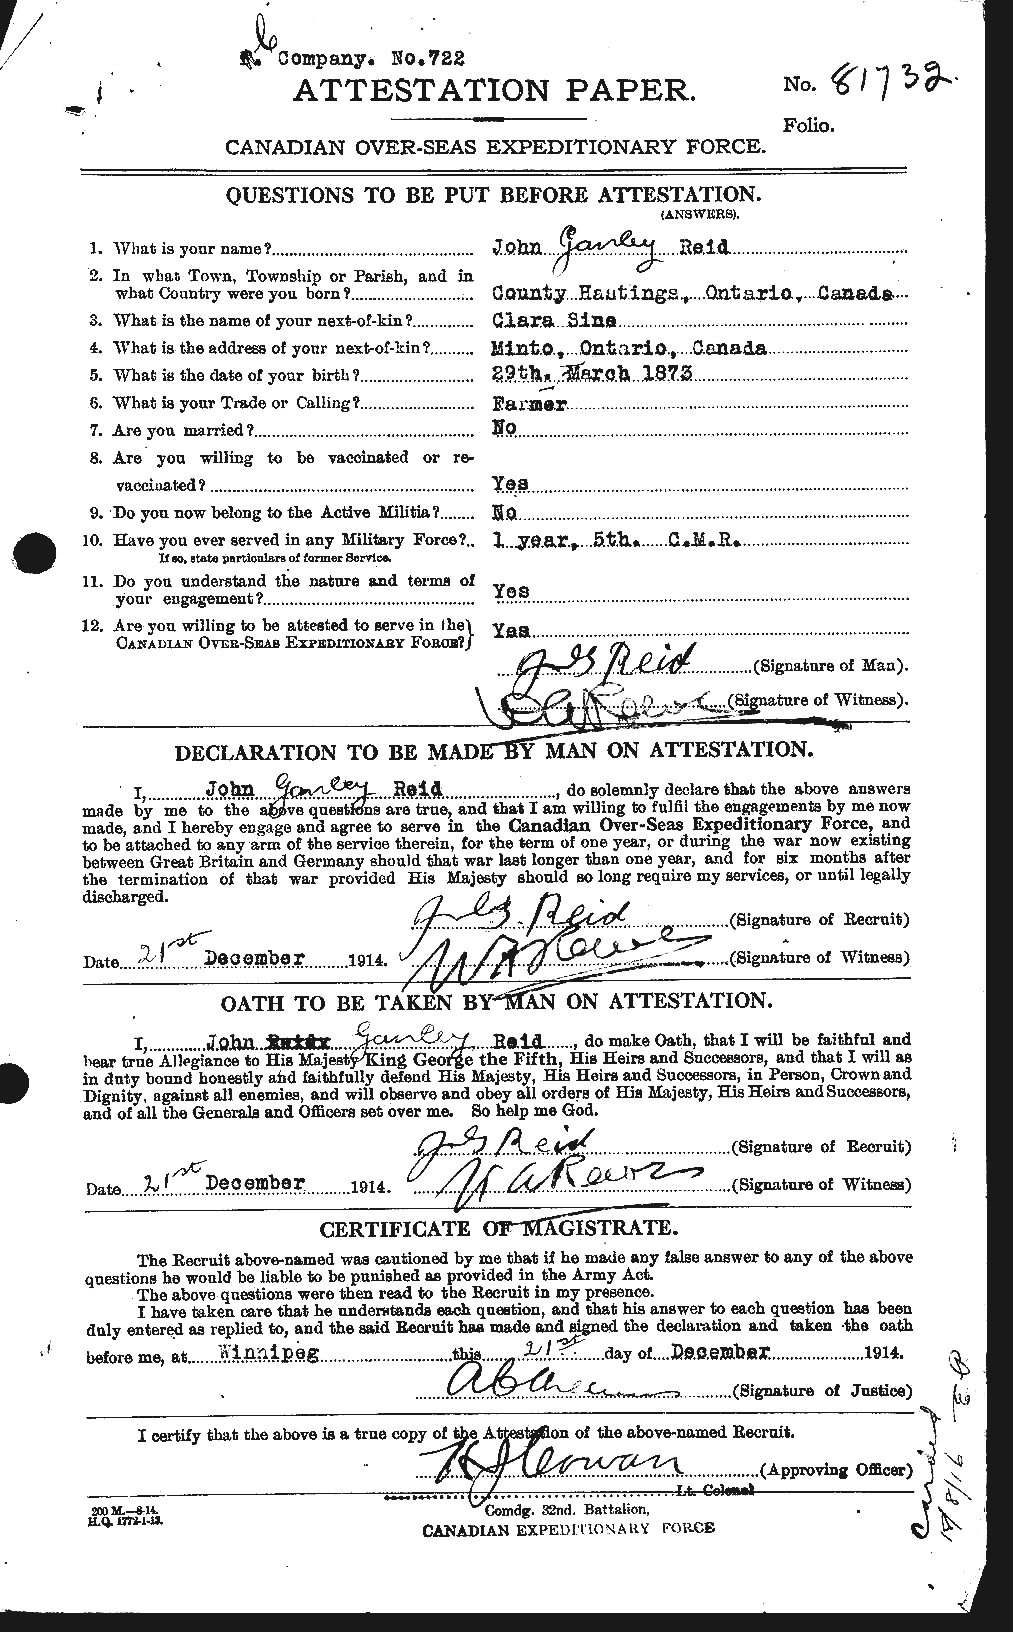 Personnel Records of the First World War - CEF 598840a